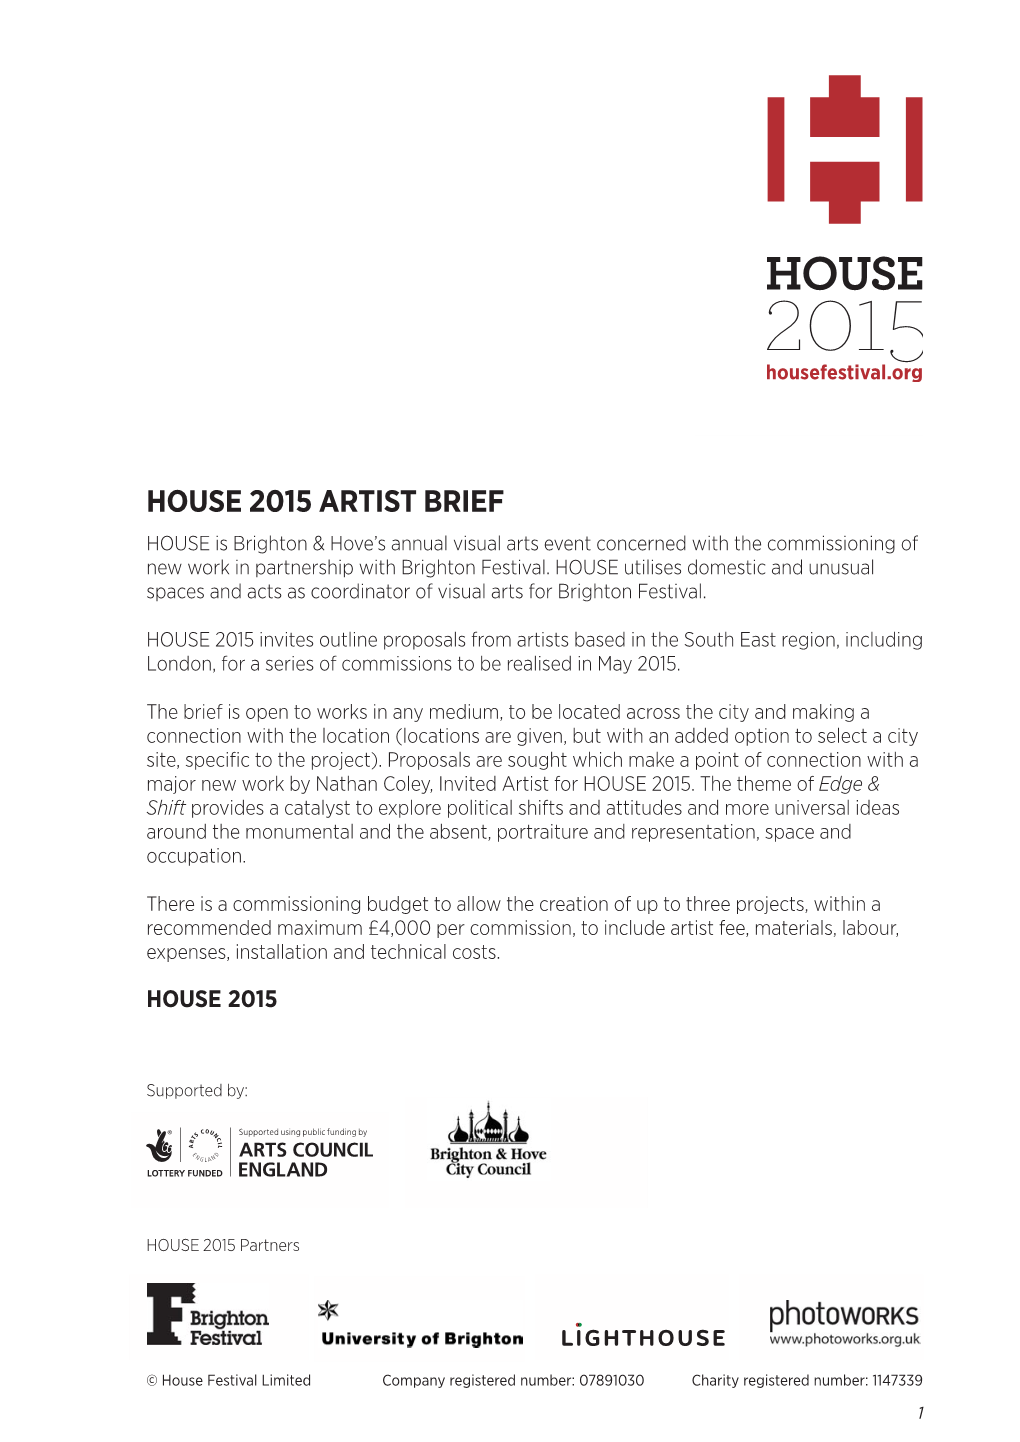 HOUSE 2015 ARTIST BRIEF HOUSE Is Brighton & Hove’S Annual Visual Arts Event Concerned with the Commissioning of New Work in Partnership with Brighton Festival